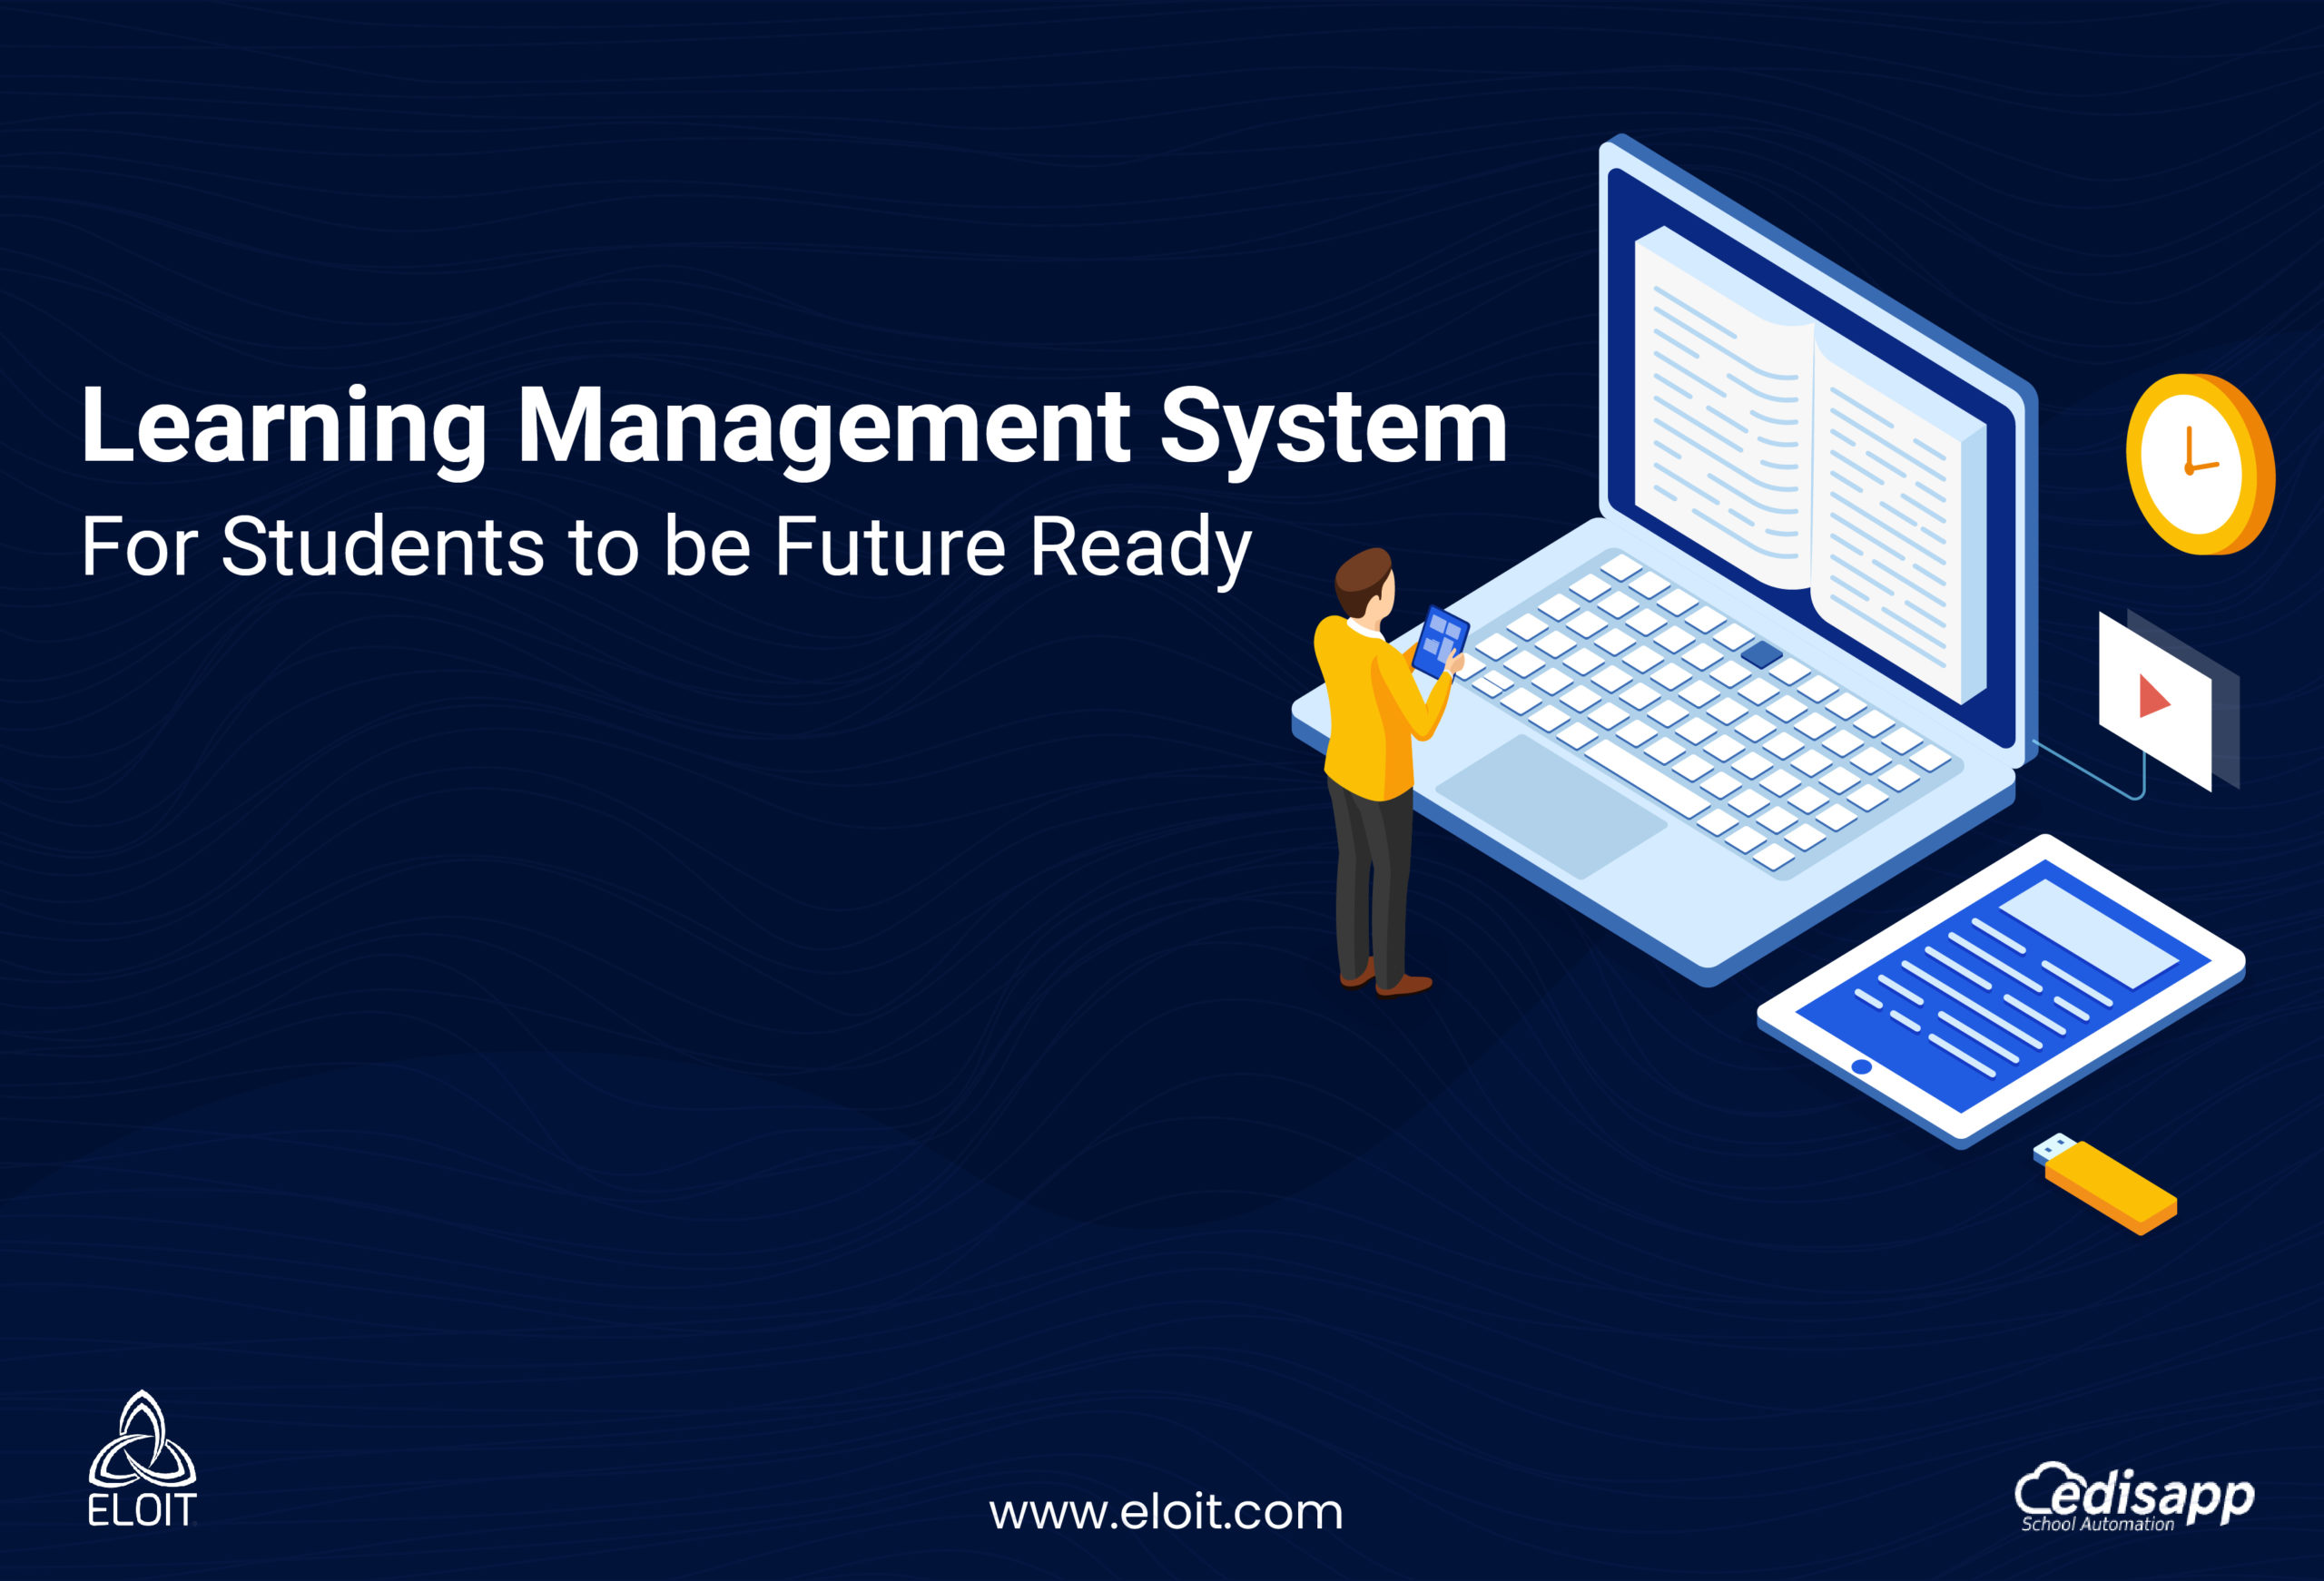 How Can A Learning Management System Help Students in Skill Development?